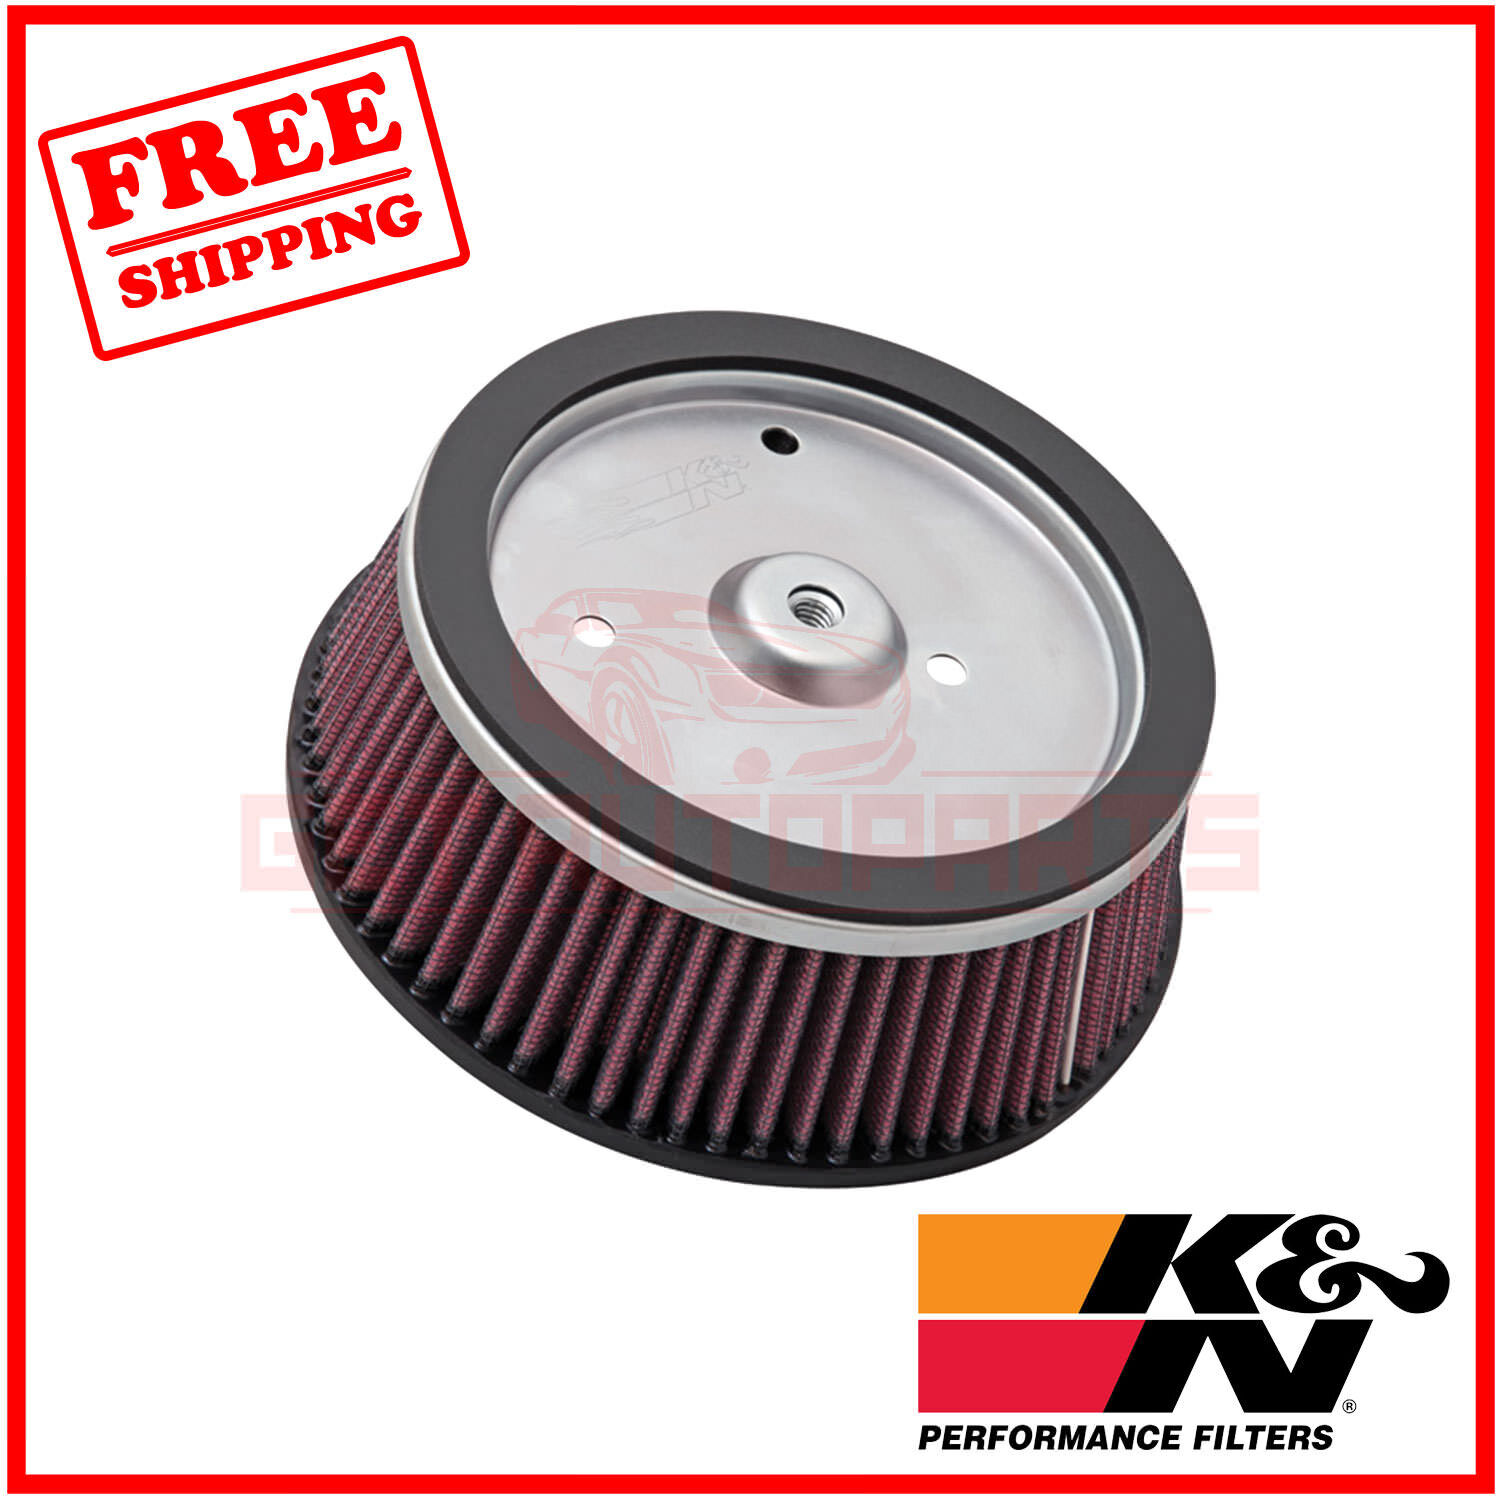 K&N Replacement Air Filter fits Harley Davidson FXDLI Dyna Low Rider 2004-2006